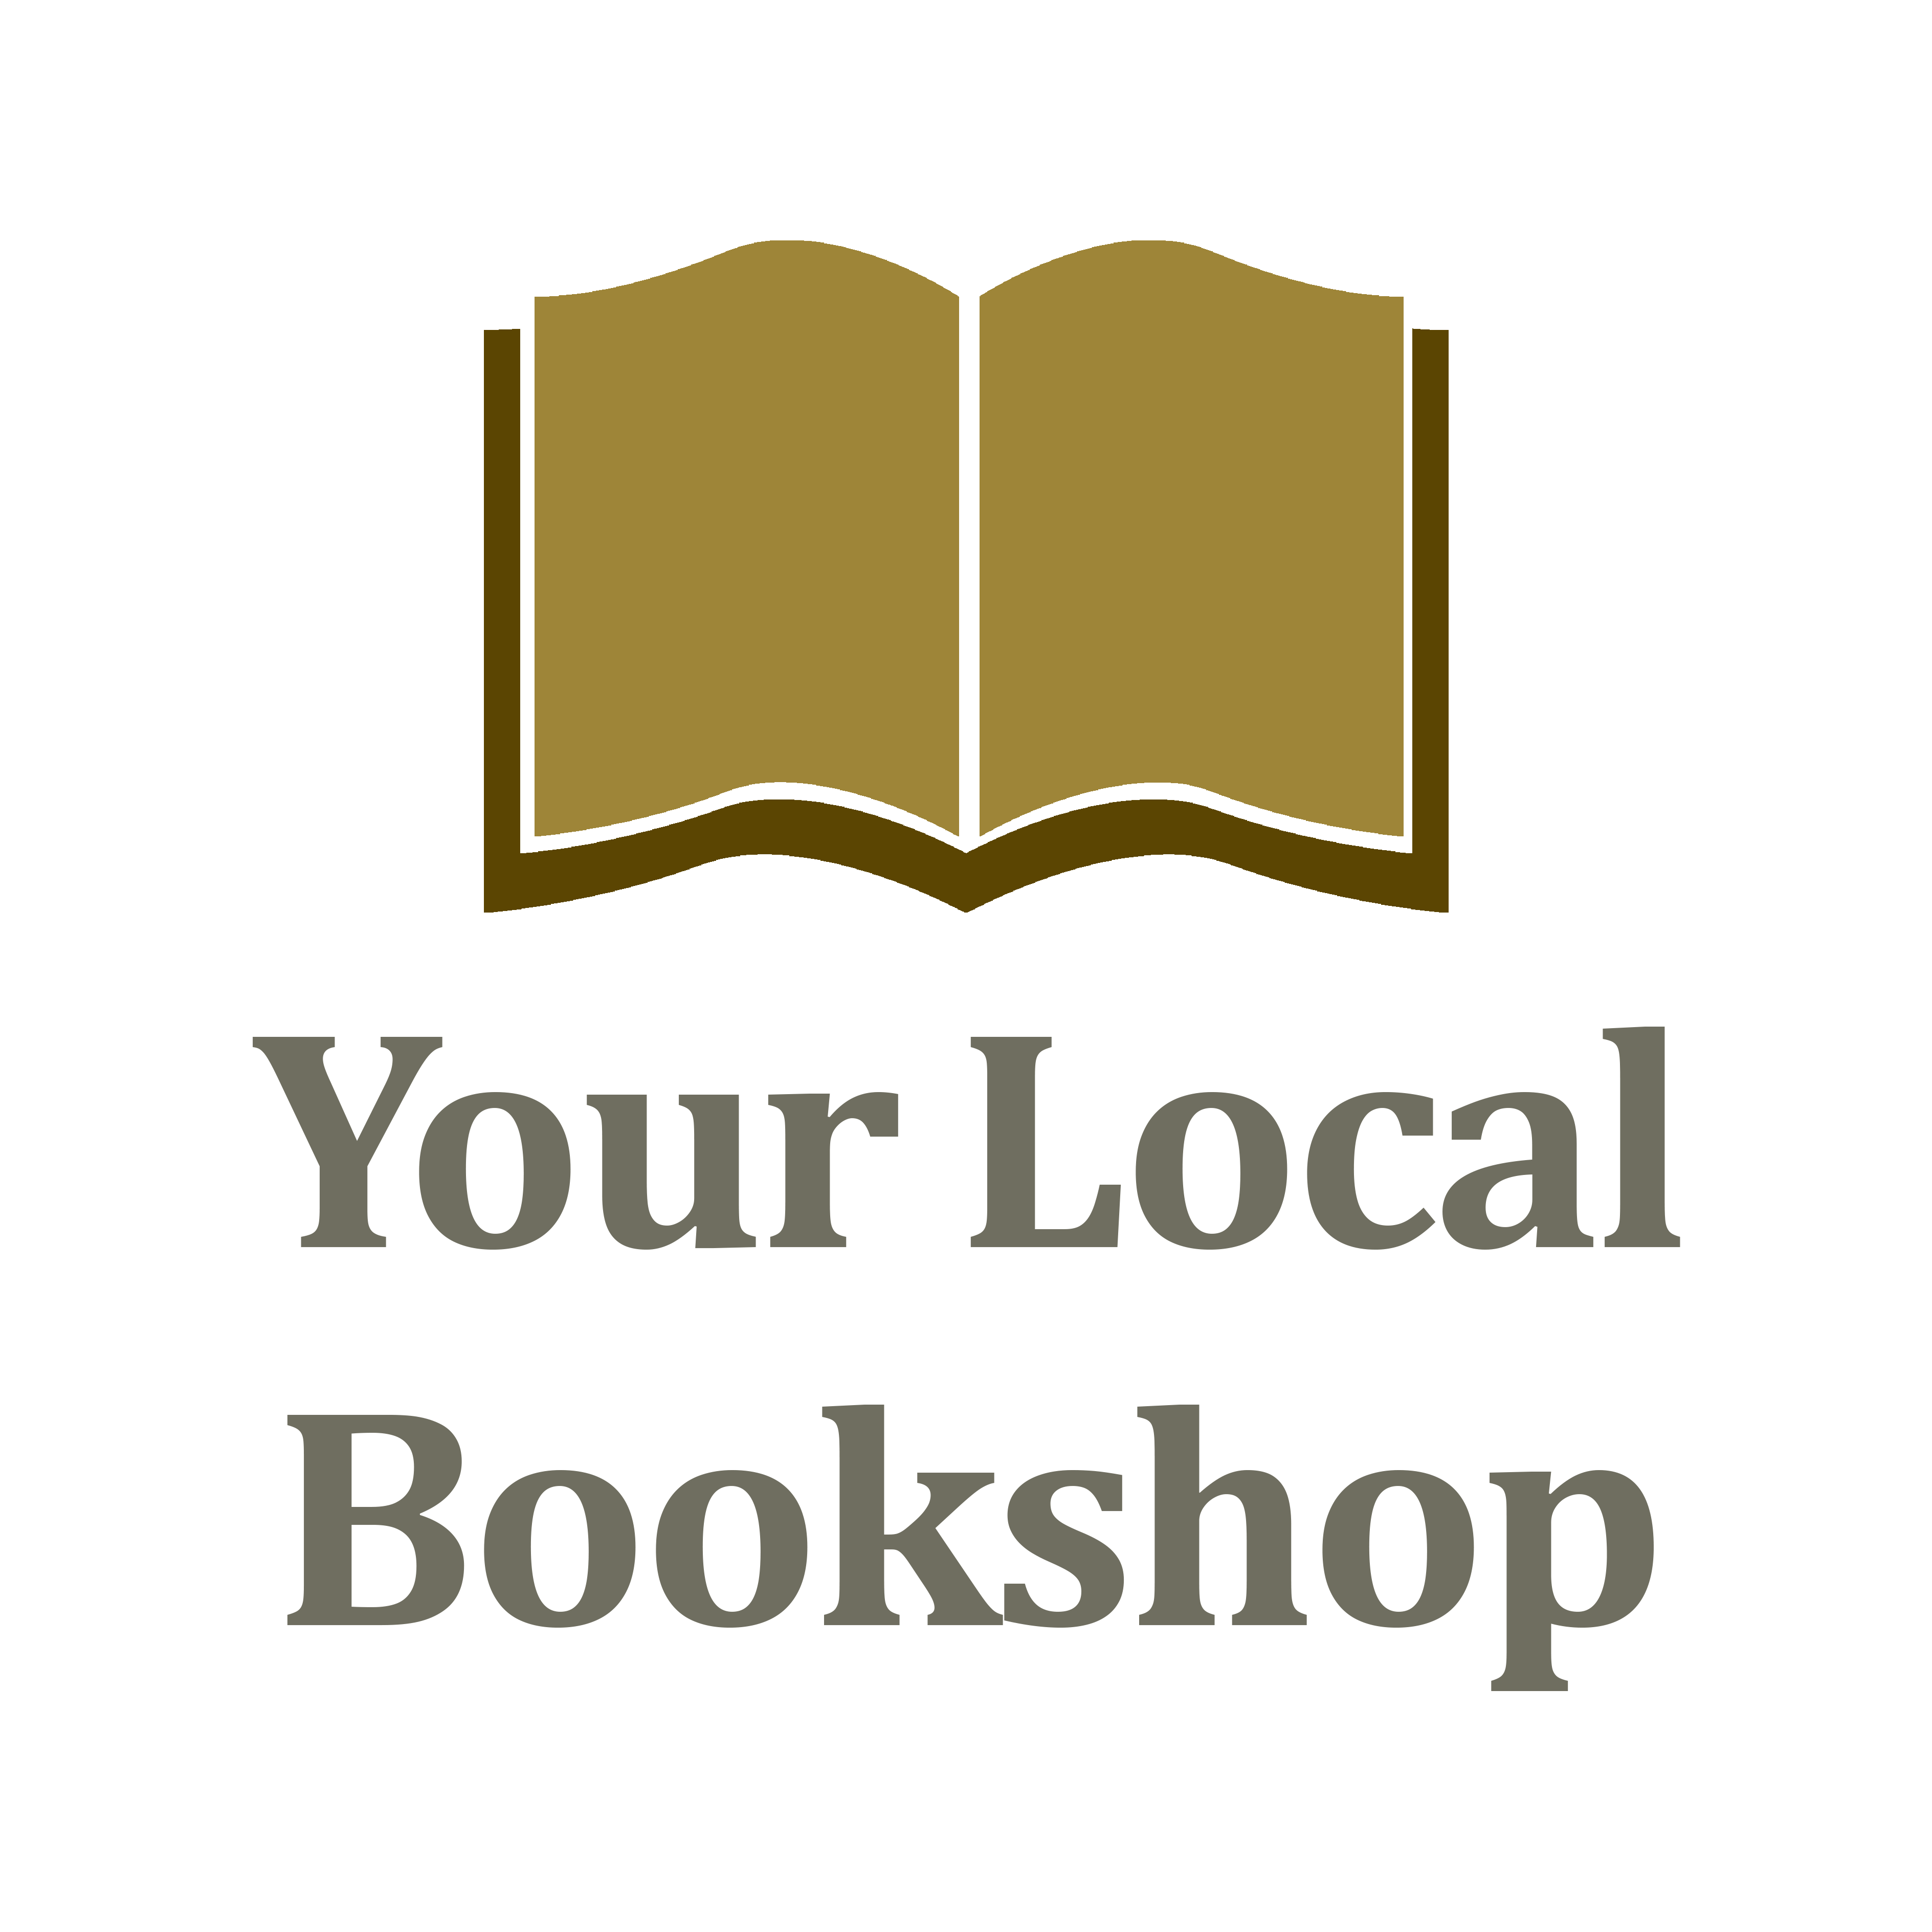 Purchase Fog & Fireflies by T.H. Lehnen from your local bookshop